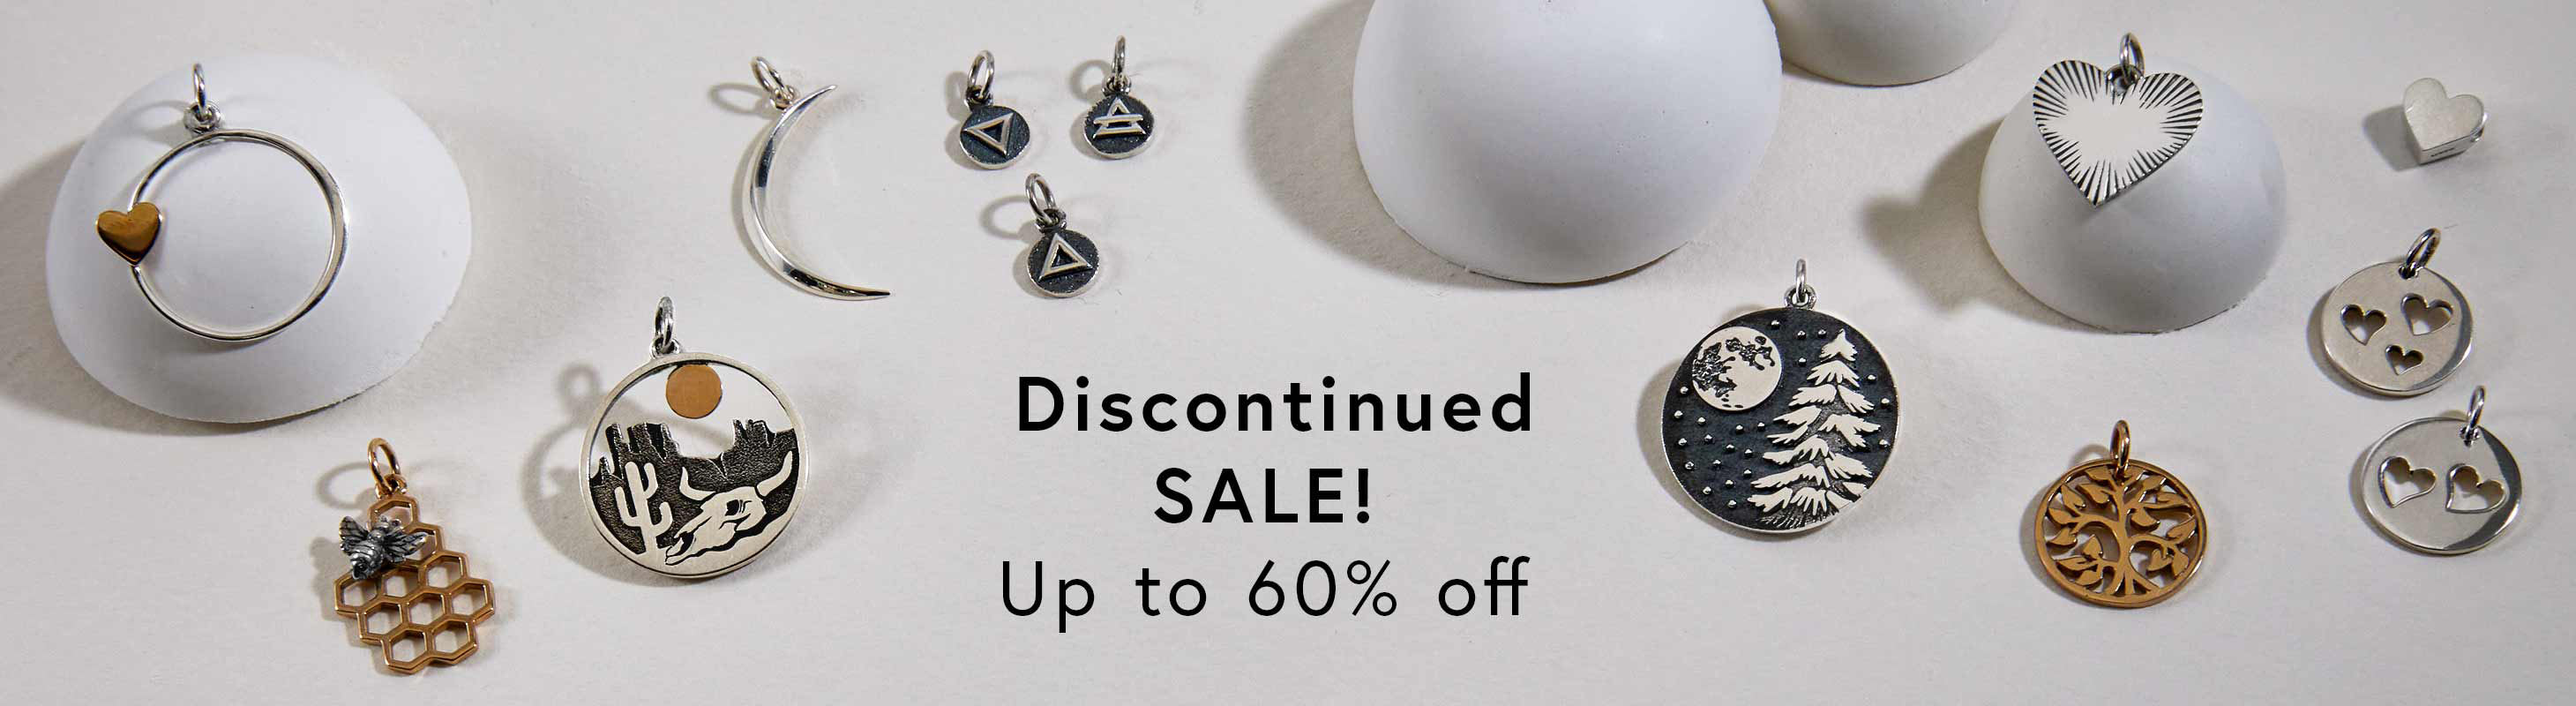 Nina Designs Sale Silver Charms, Up to 60% off. 